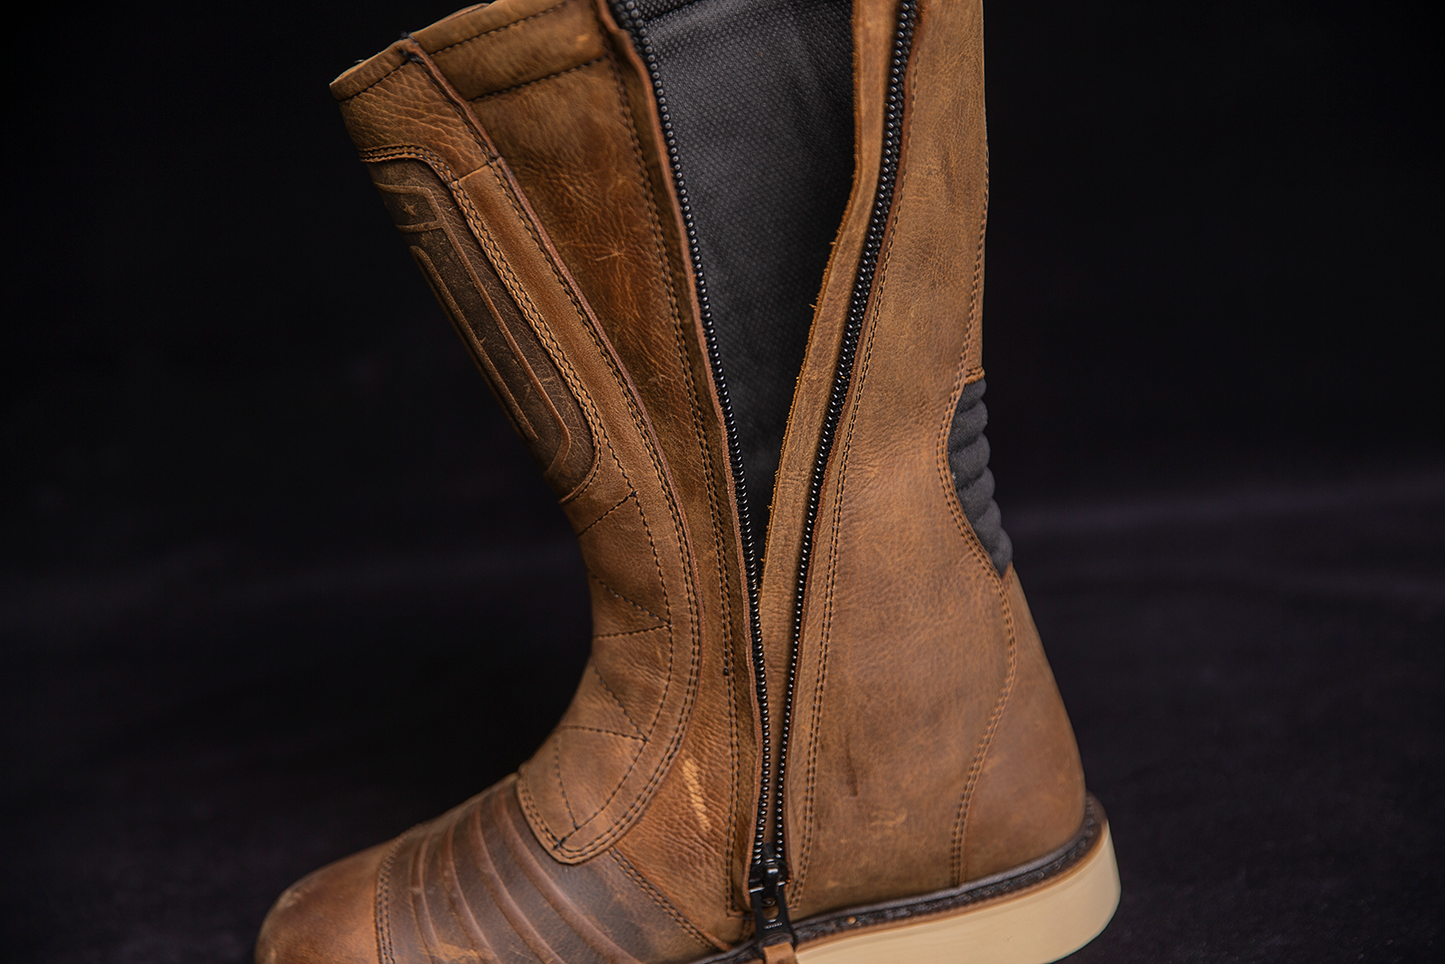 ICON Elsinore 2™ CE Boots - Brown - Size 10.5 3403-1226